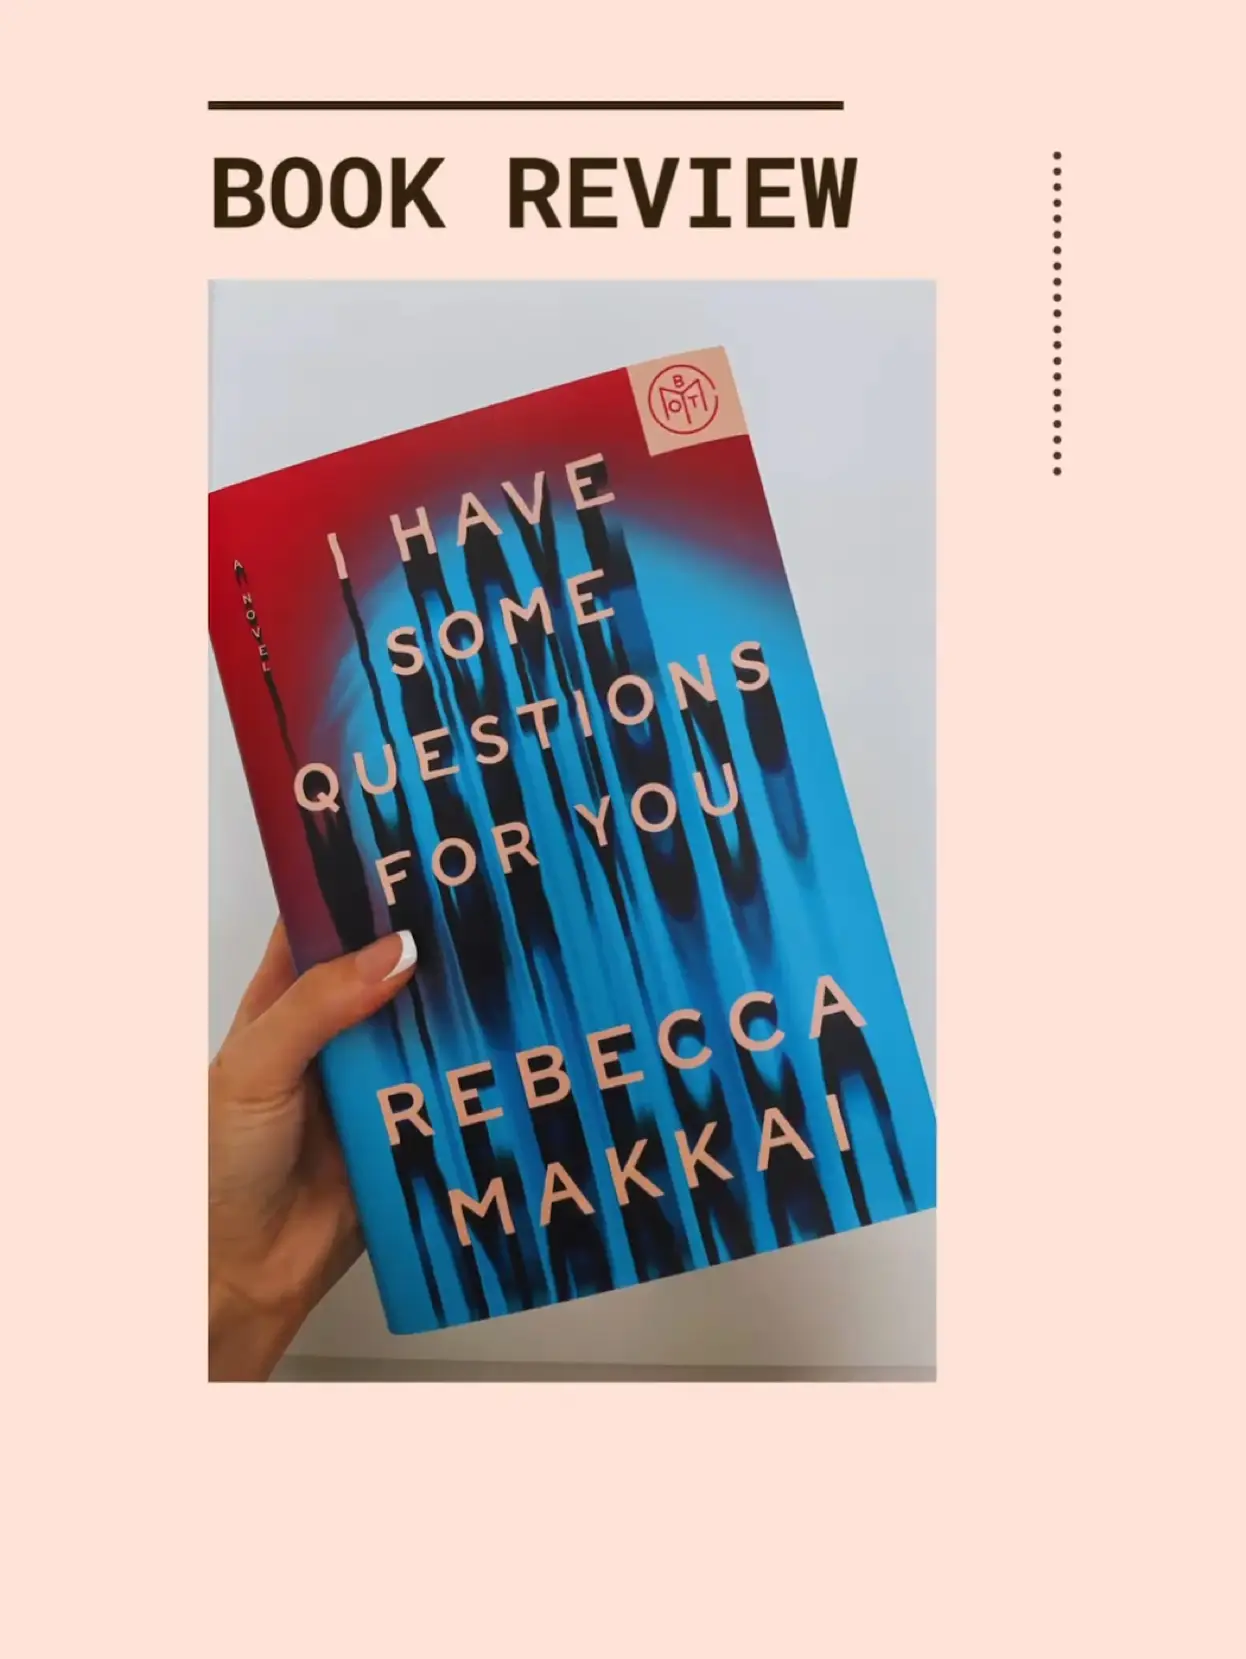 BOOK REVIEW - I Have Some Questions For You's images